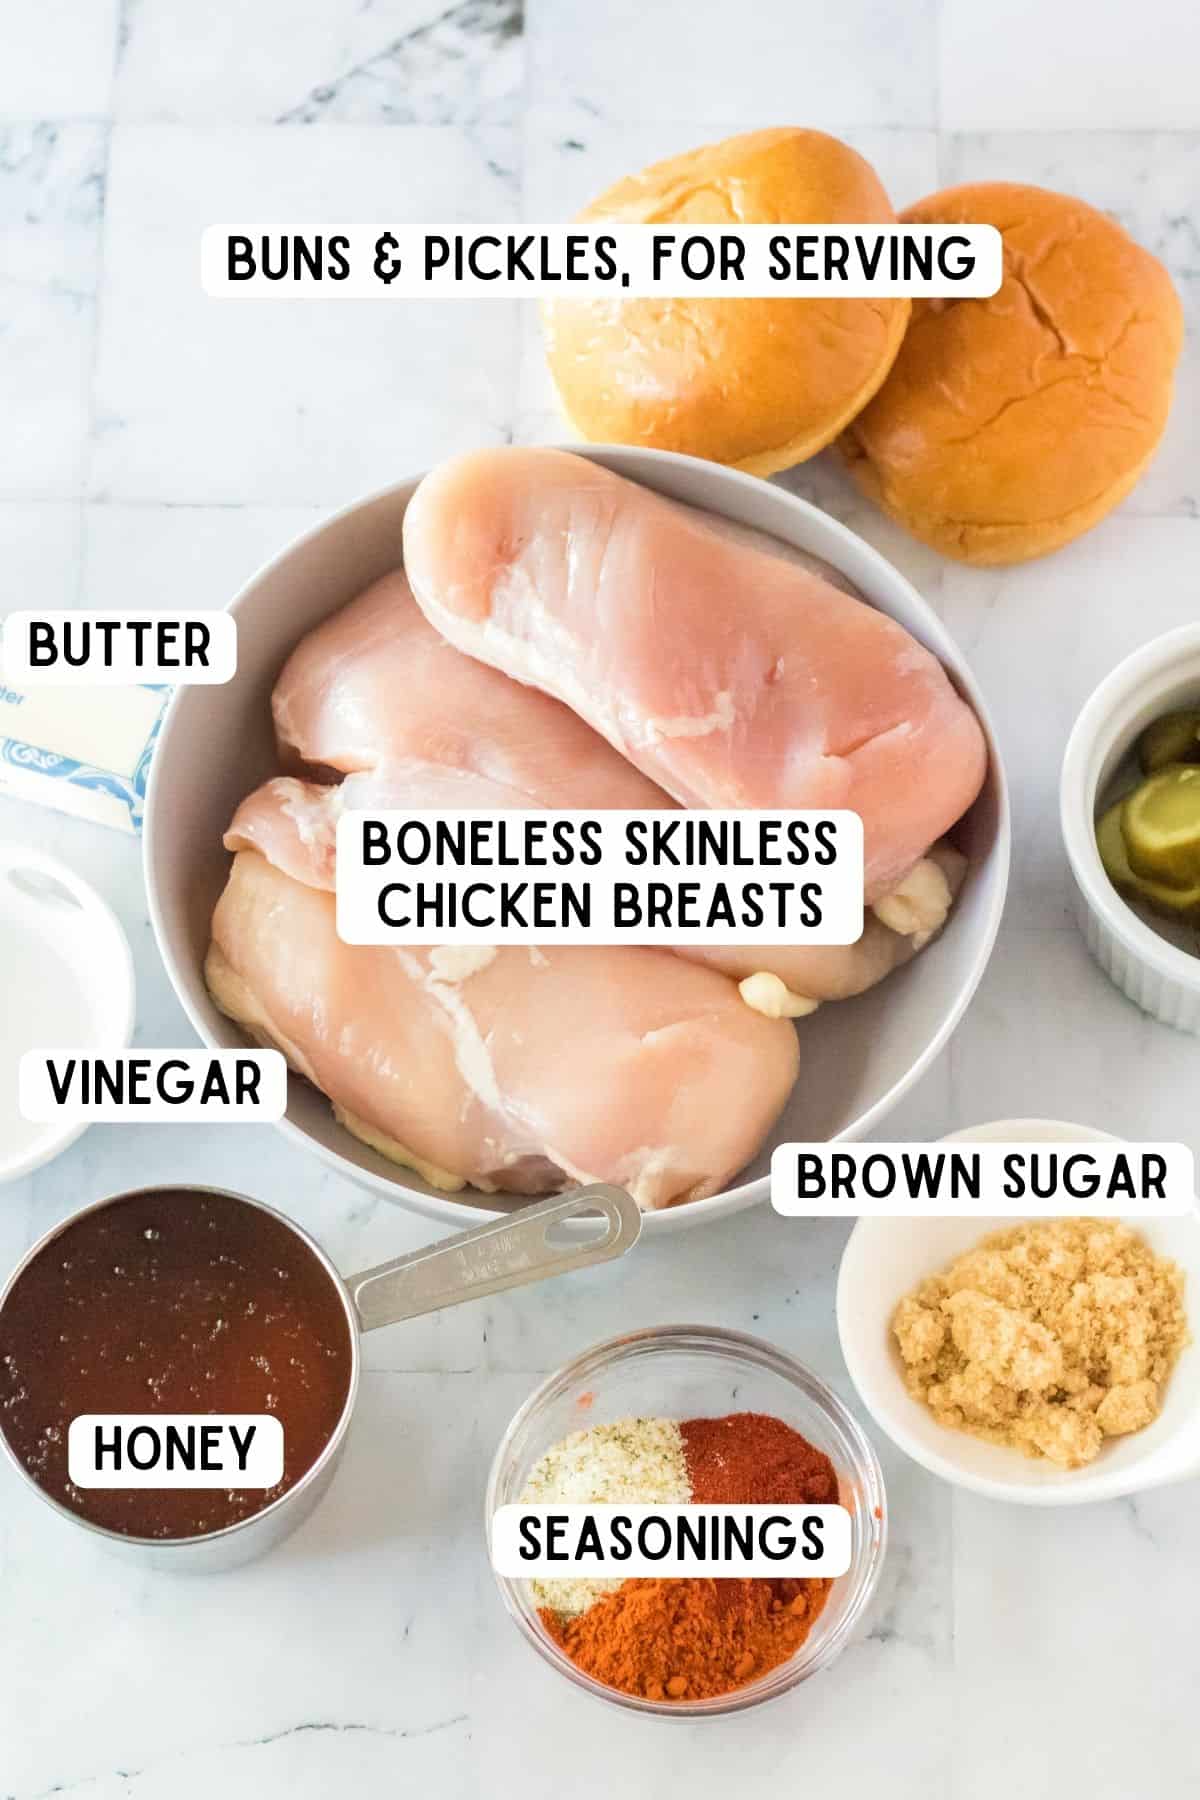 Ingredients for slow cooker hot honey chicken sandwiches.